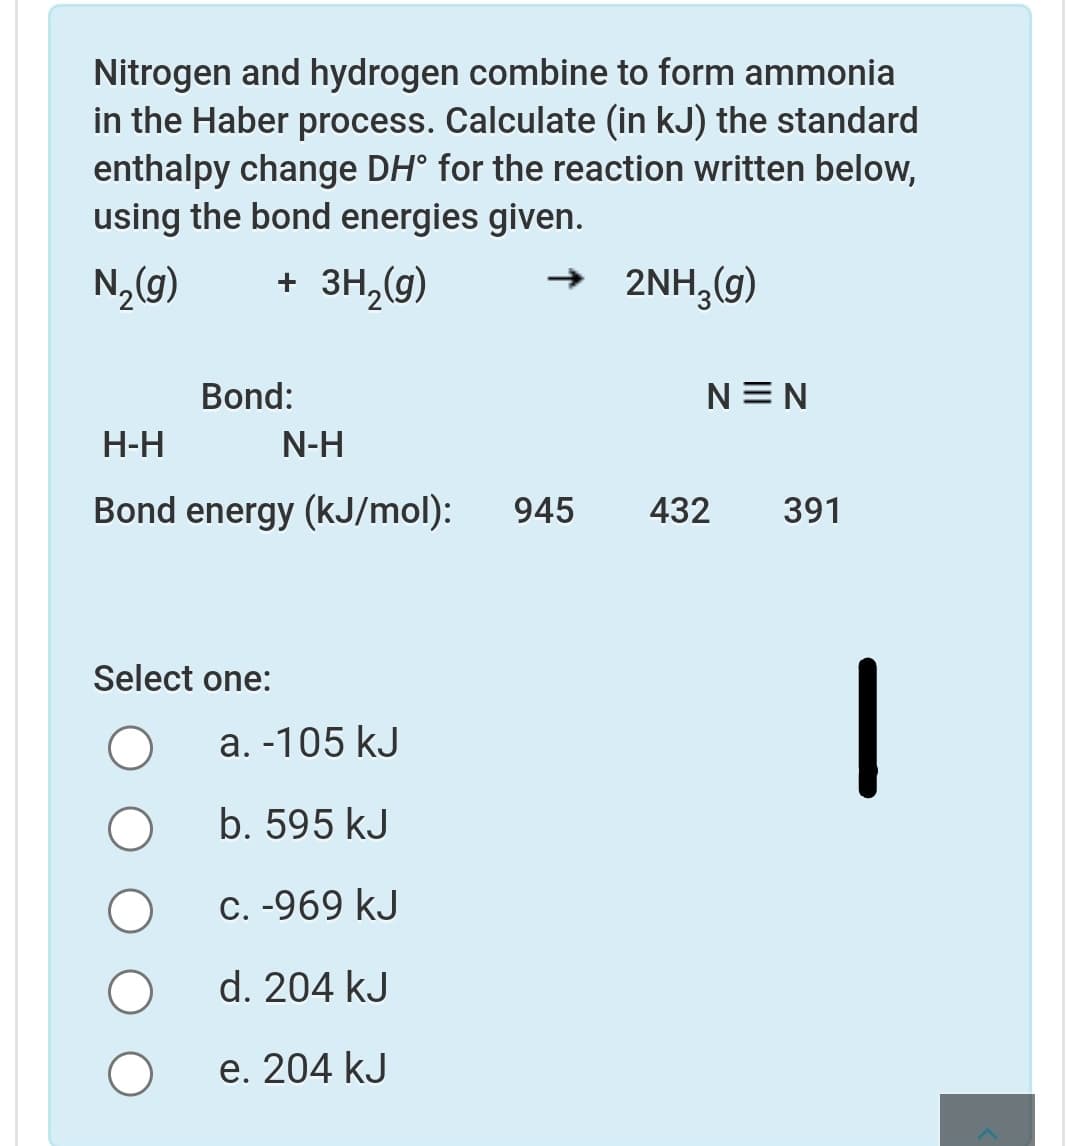 Nitrogen and hydrogen combine to form ammonia
in the Haber process. Calculate (in kJ) the standard
enthalpy change DH° for the reaction written below,
using the bond energies given.
N„(9)
+ 3H,(g)
→ 2NH,(9)
Bond:
N=N
Н-Н
N-H
Bond energy (kJ/mol):
945
432
391
Select one:
a. -105 kJ
b. 595 kJ
C. -969 kJ
d. 204 kJ
е. 204 kJ
